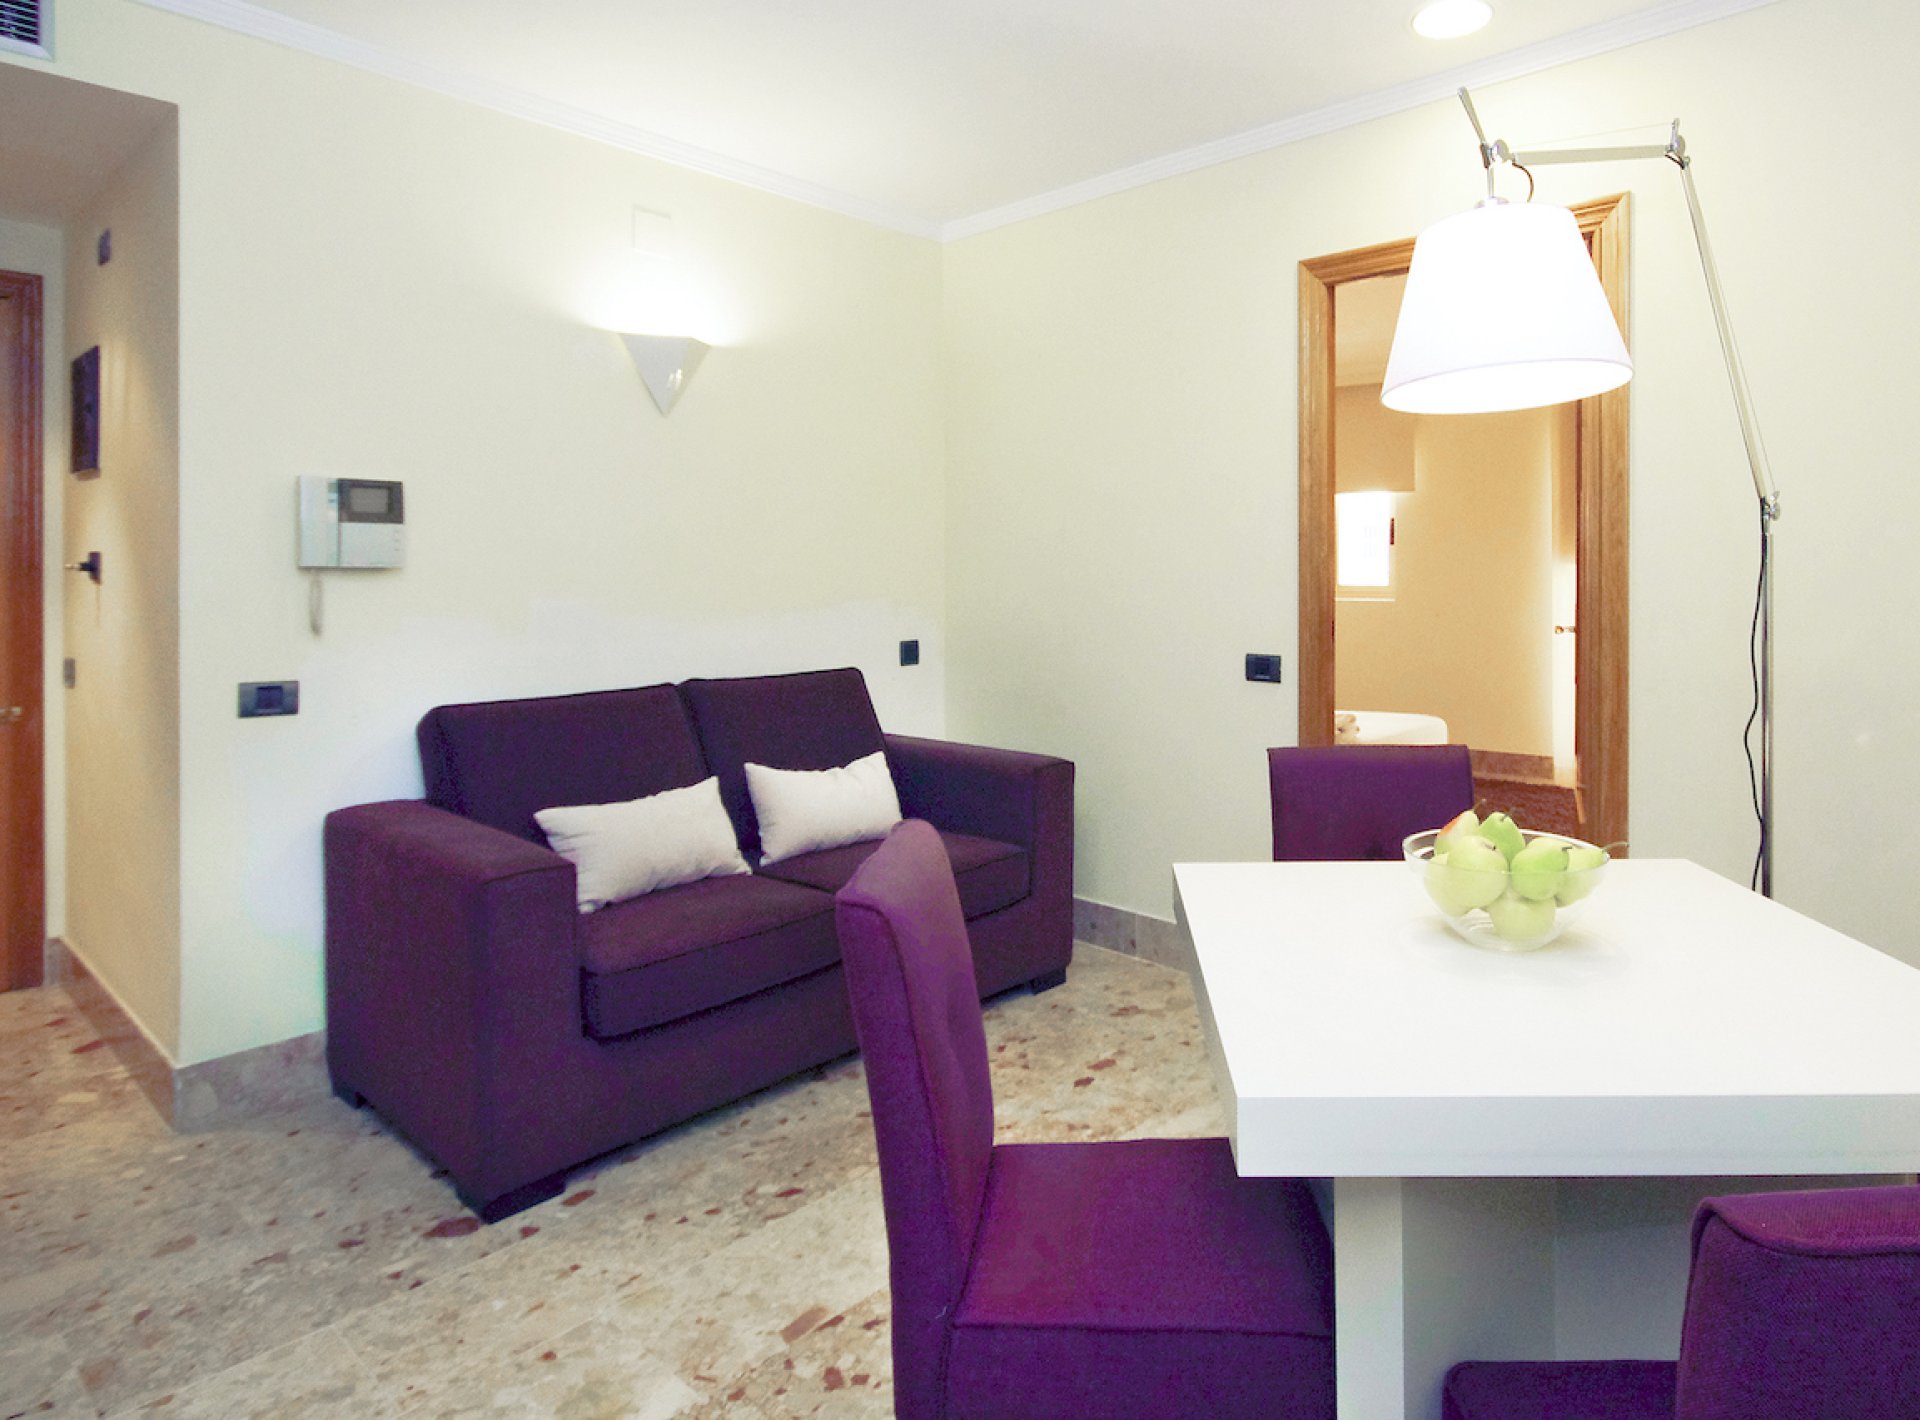 CAT 44. 1 Bedroom Apartment with balcony. 3 PAX. Catedral.